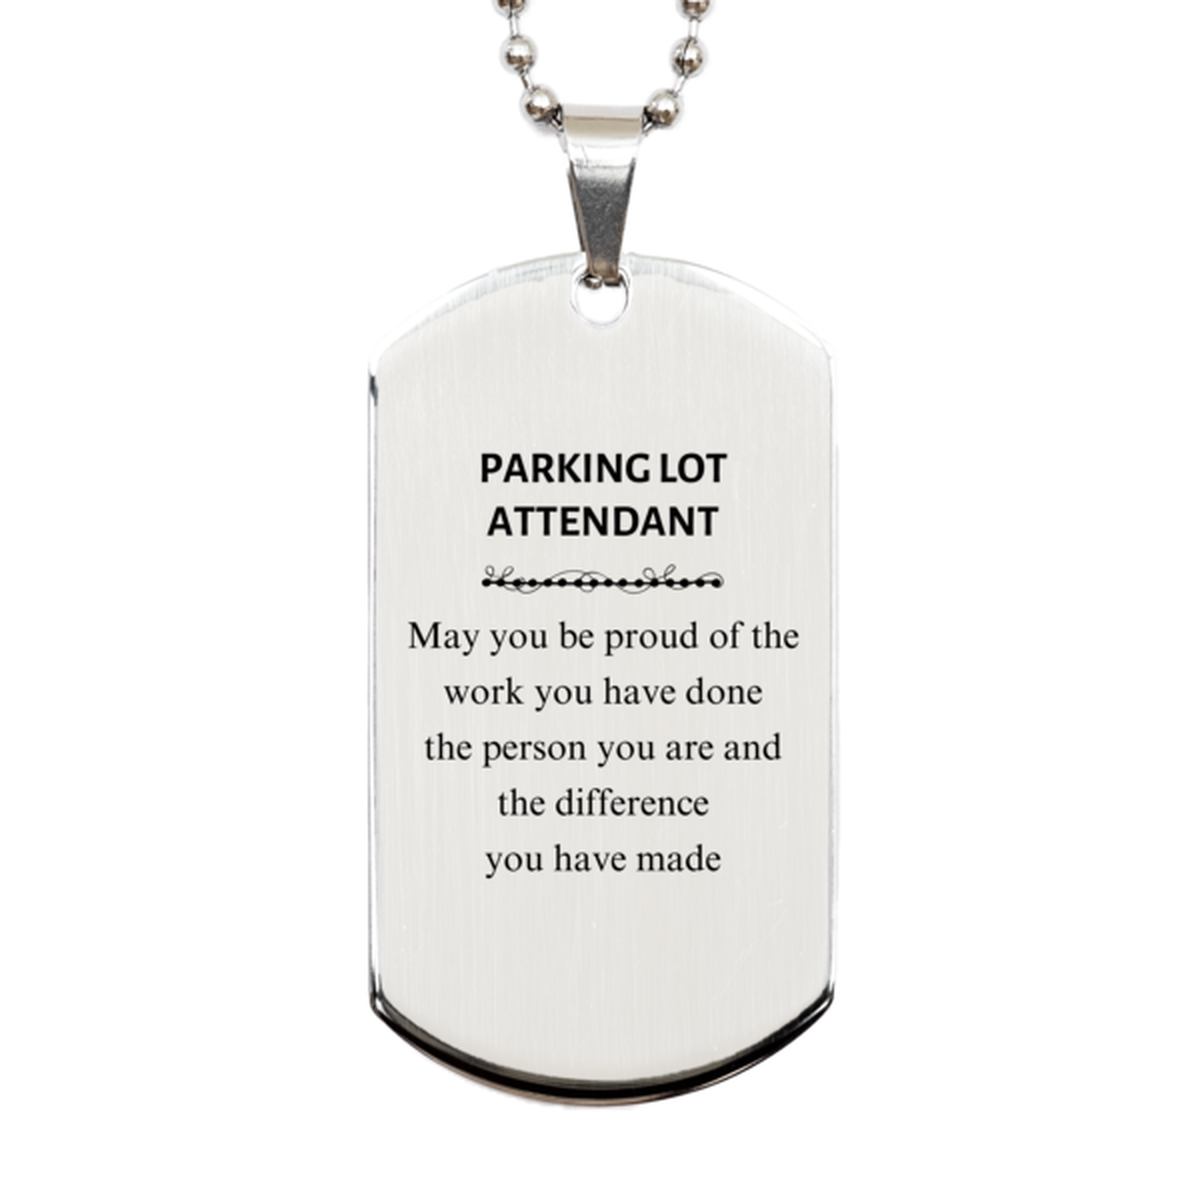 Parking Lot Attendant May you be proud of the work you have done, Retirement Parking Lot Attendant Silver Dog Tag for Colleague Appreciation Gifts Amazing for Parking Lot Attendant